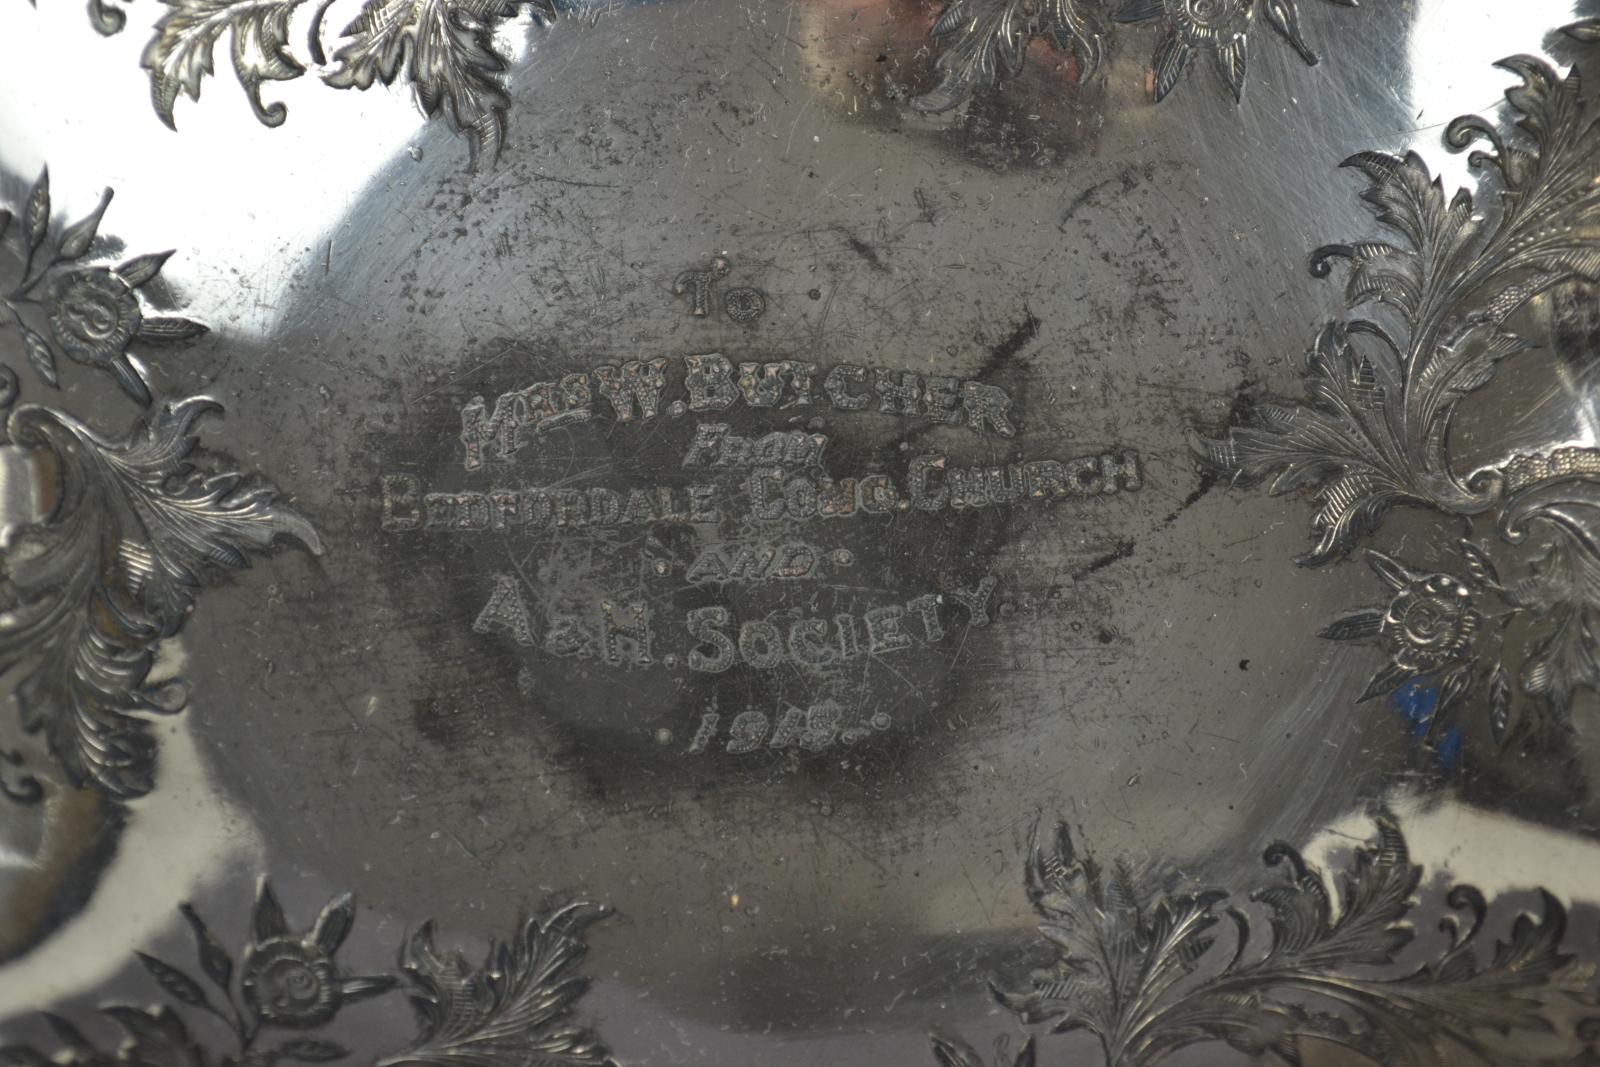 close up of engraved inscription on reflective metal surface. Inscription 'To / MRS W. BUTCHER / FROM / BEDFORDALE CONG. CHURCH / AND A&H. SOCIETY / 1913'